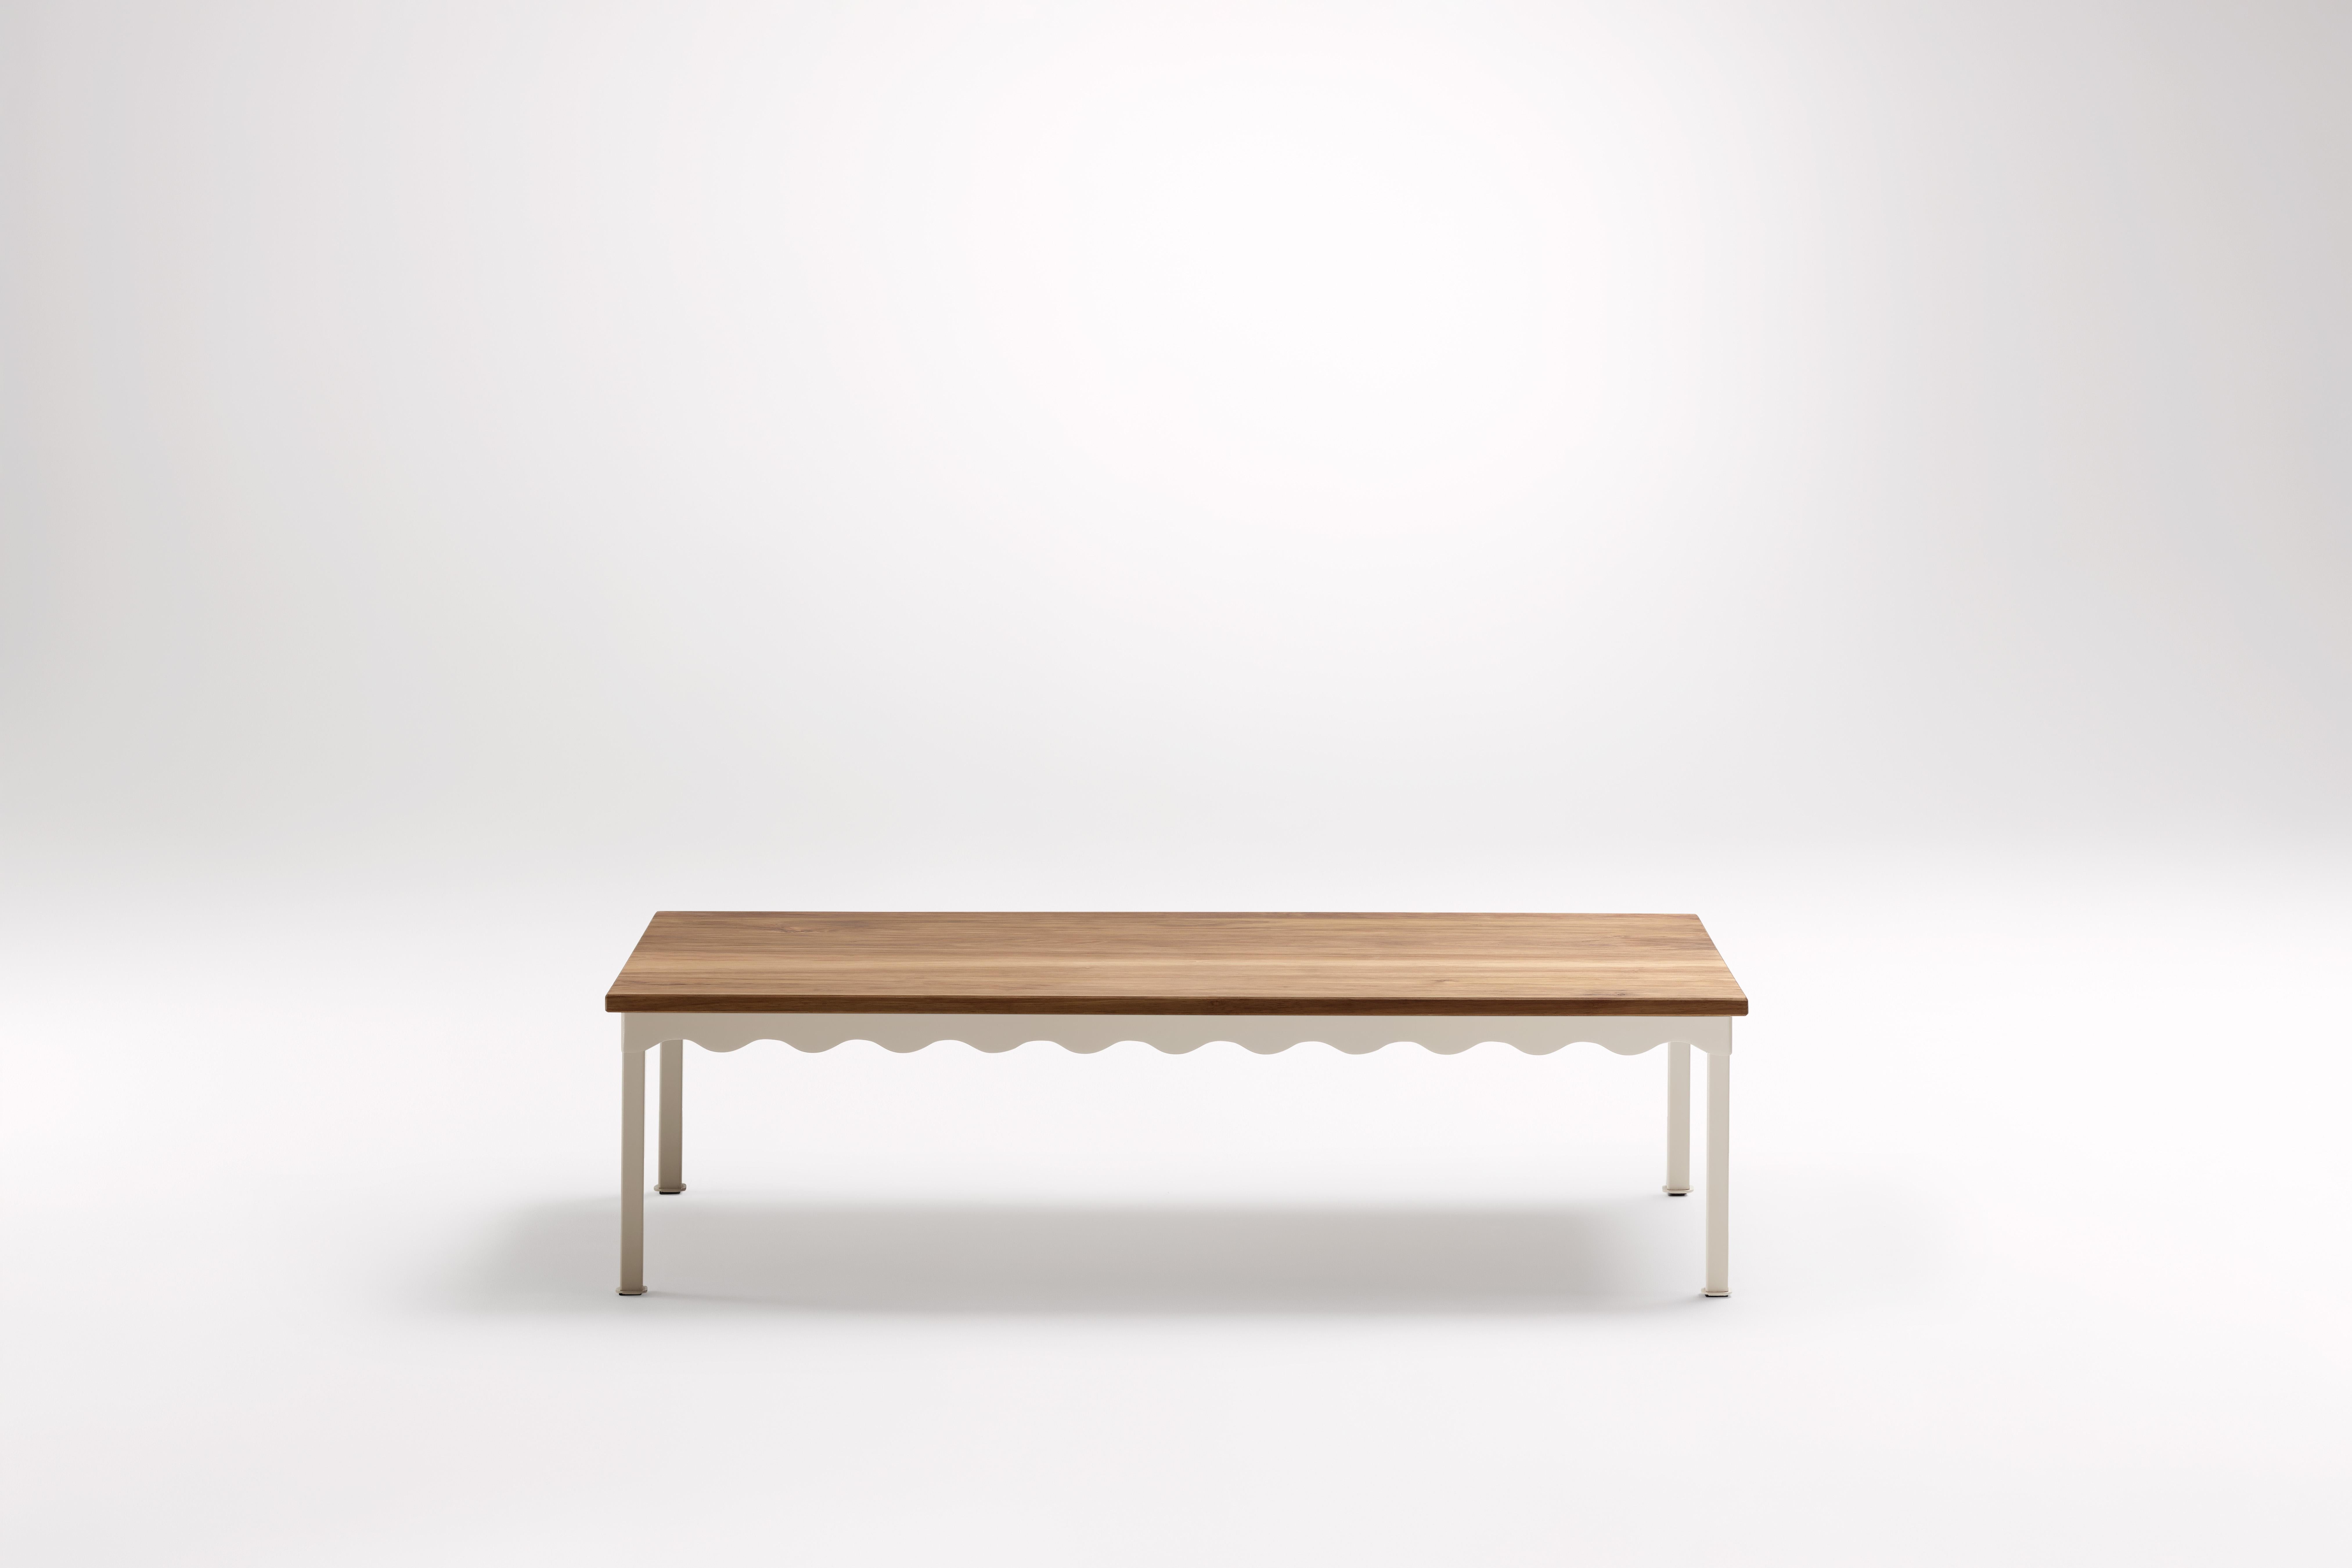 Blackwood Bellini Coffee Table by Coco Flip
Dimensions: D 126 x W 66 x H 32 cm
Materials: Timber / Stone tops, Powder-coated steel frame. 
Weight: 20kg
Frame Finishes: Textura Paperbark.

Coco Flip is a Melbourne based furniture and lighting design